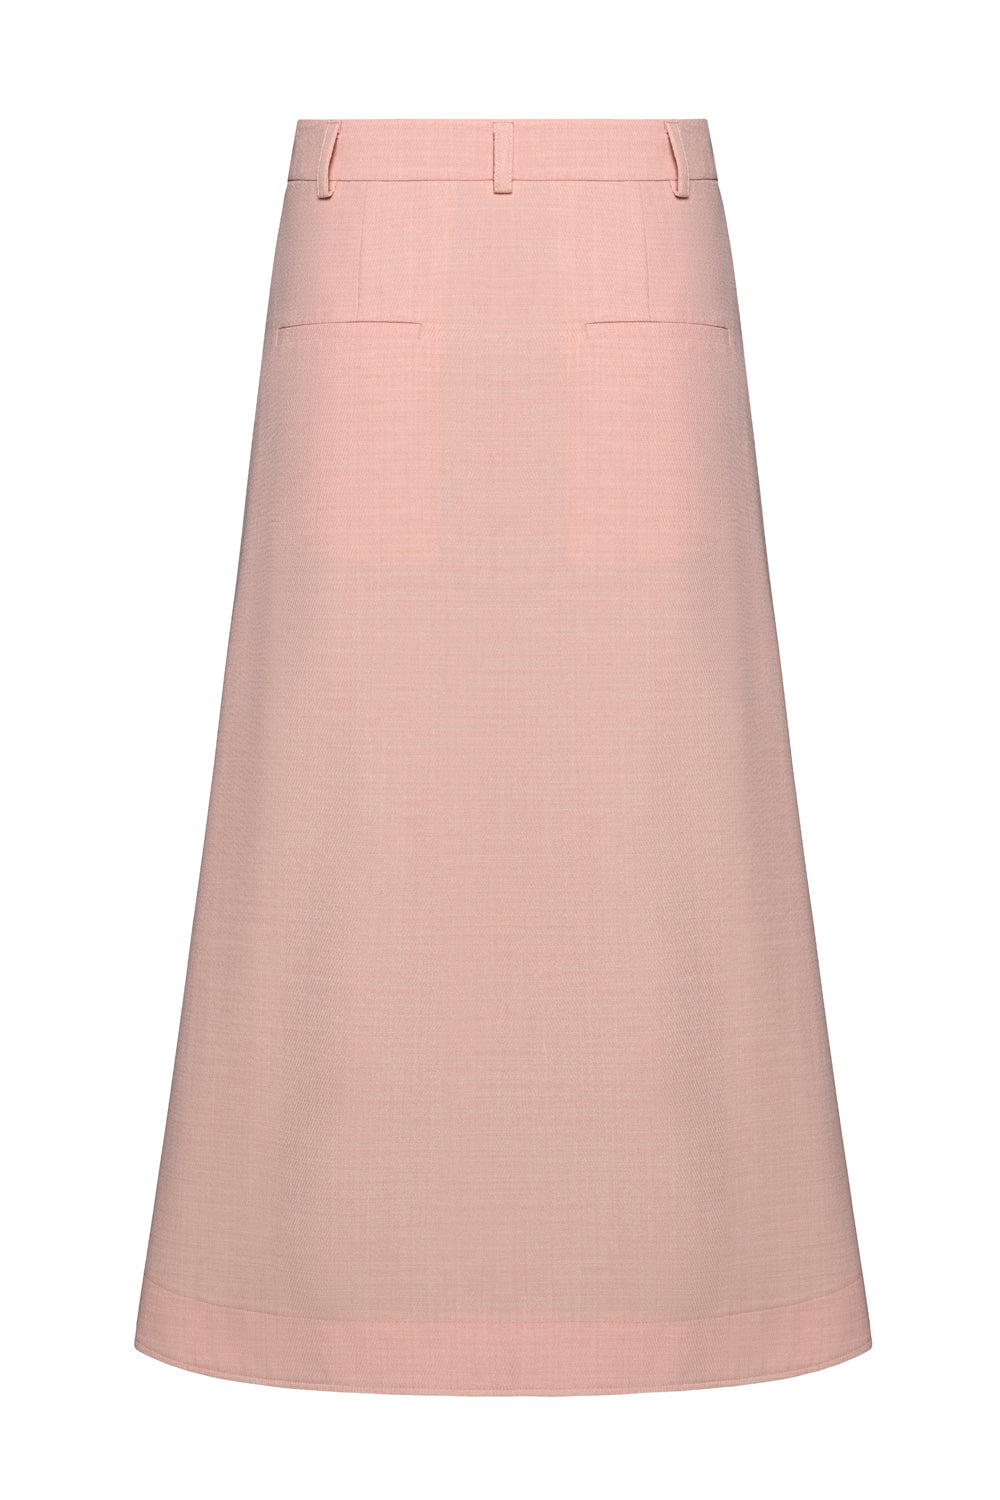 Load image into Gallery viewer, Twill Pink Skirt
